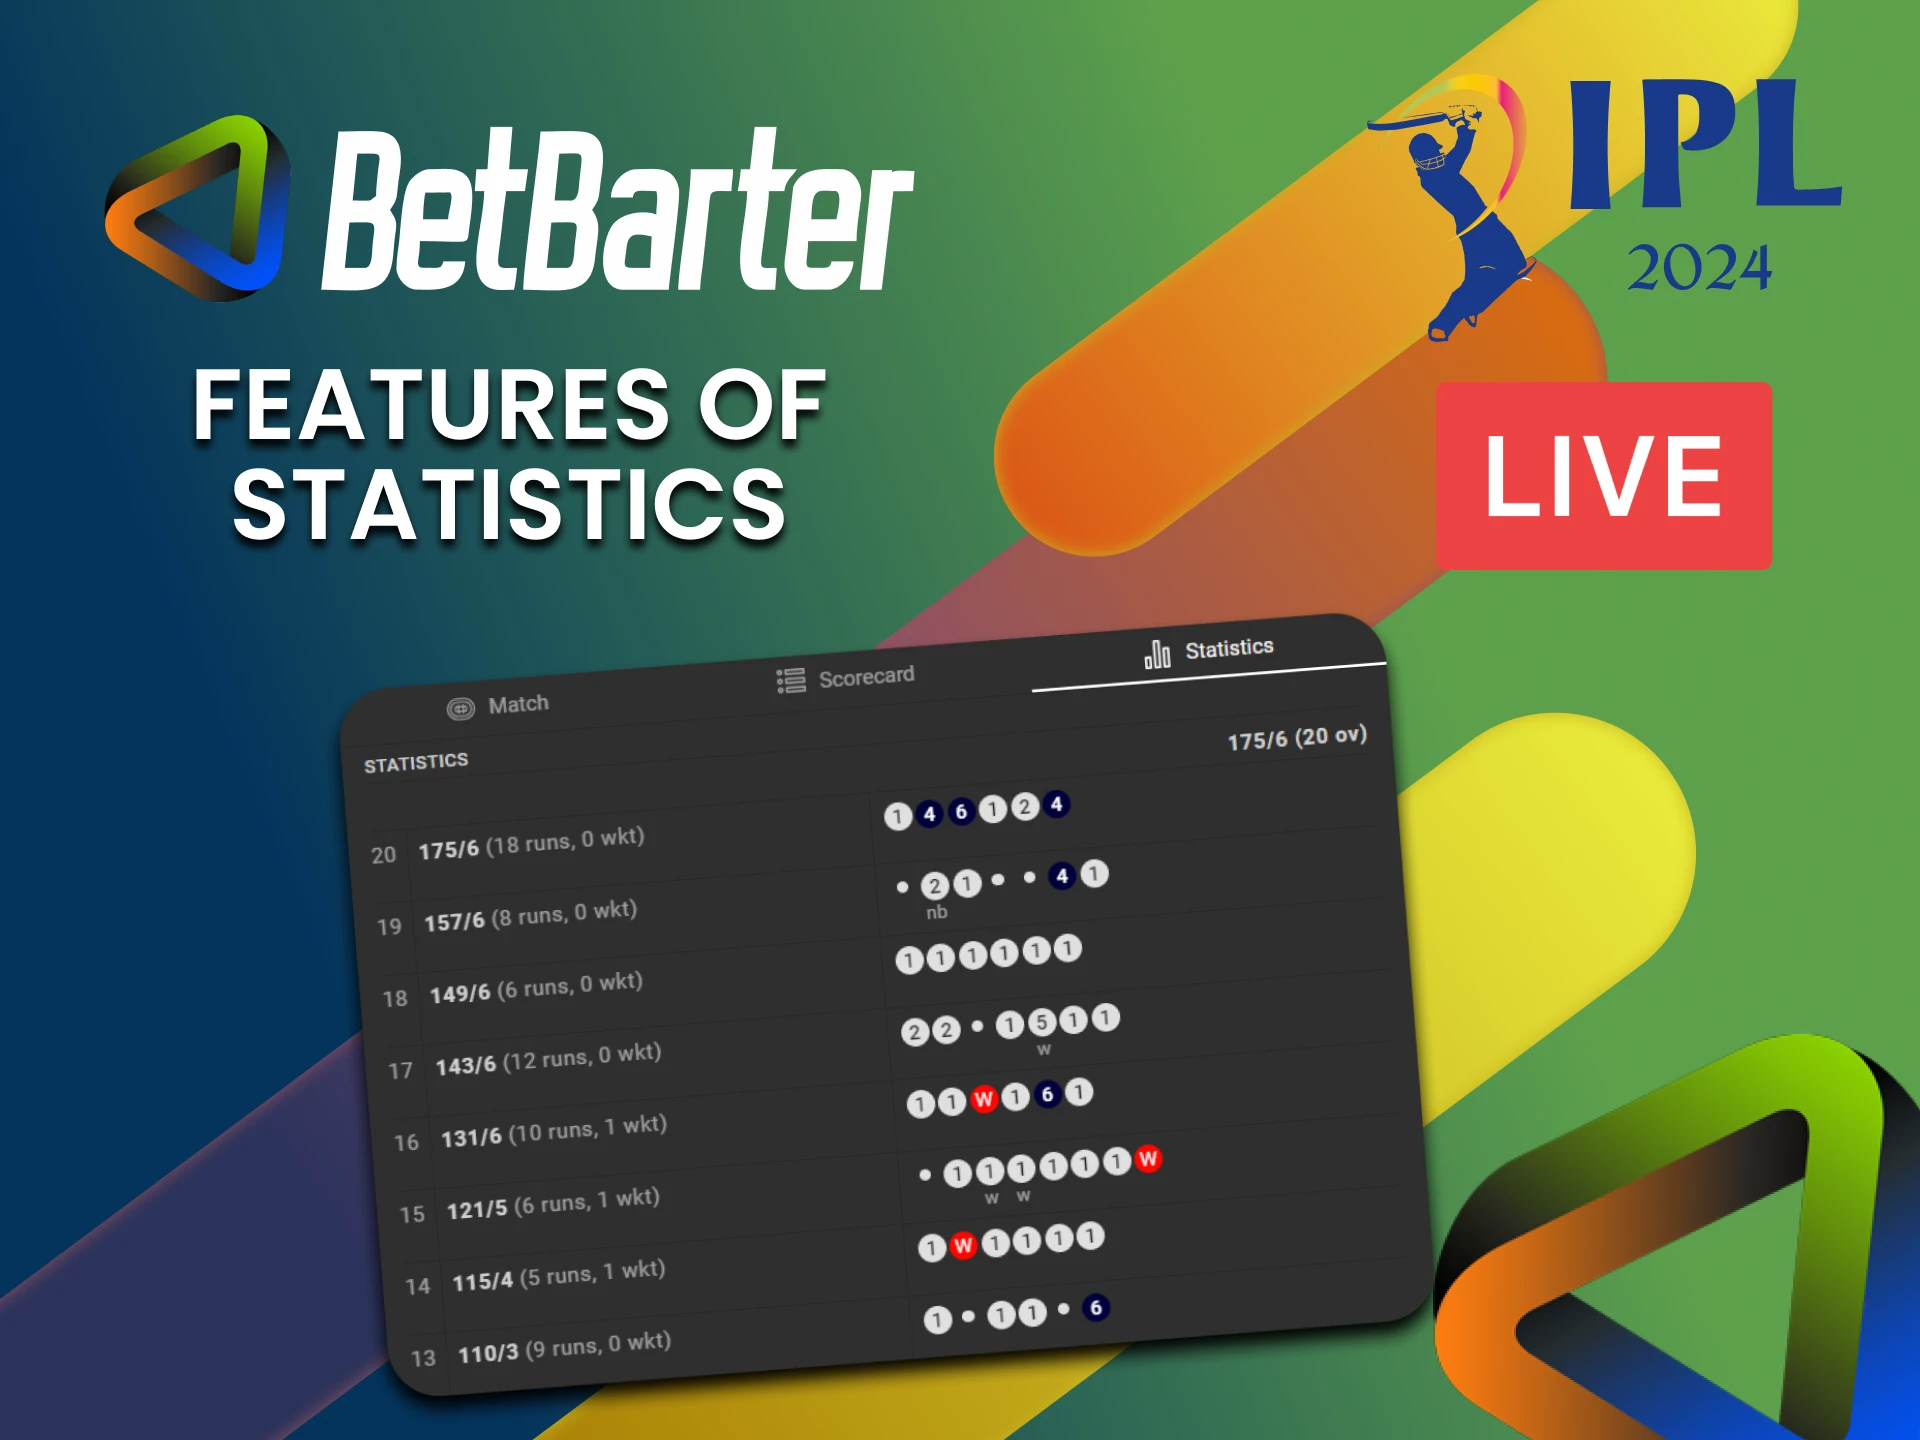 You can track the stats of live IPL matches on BetBarter.